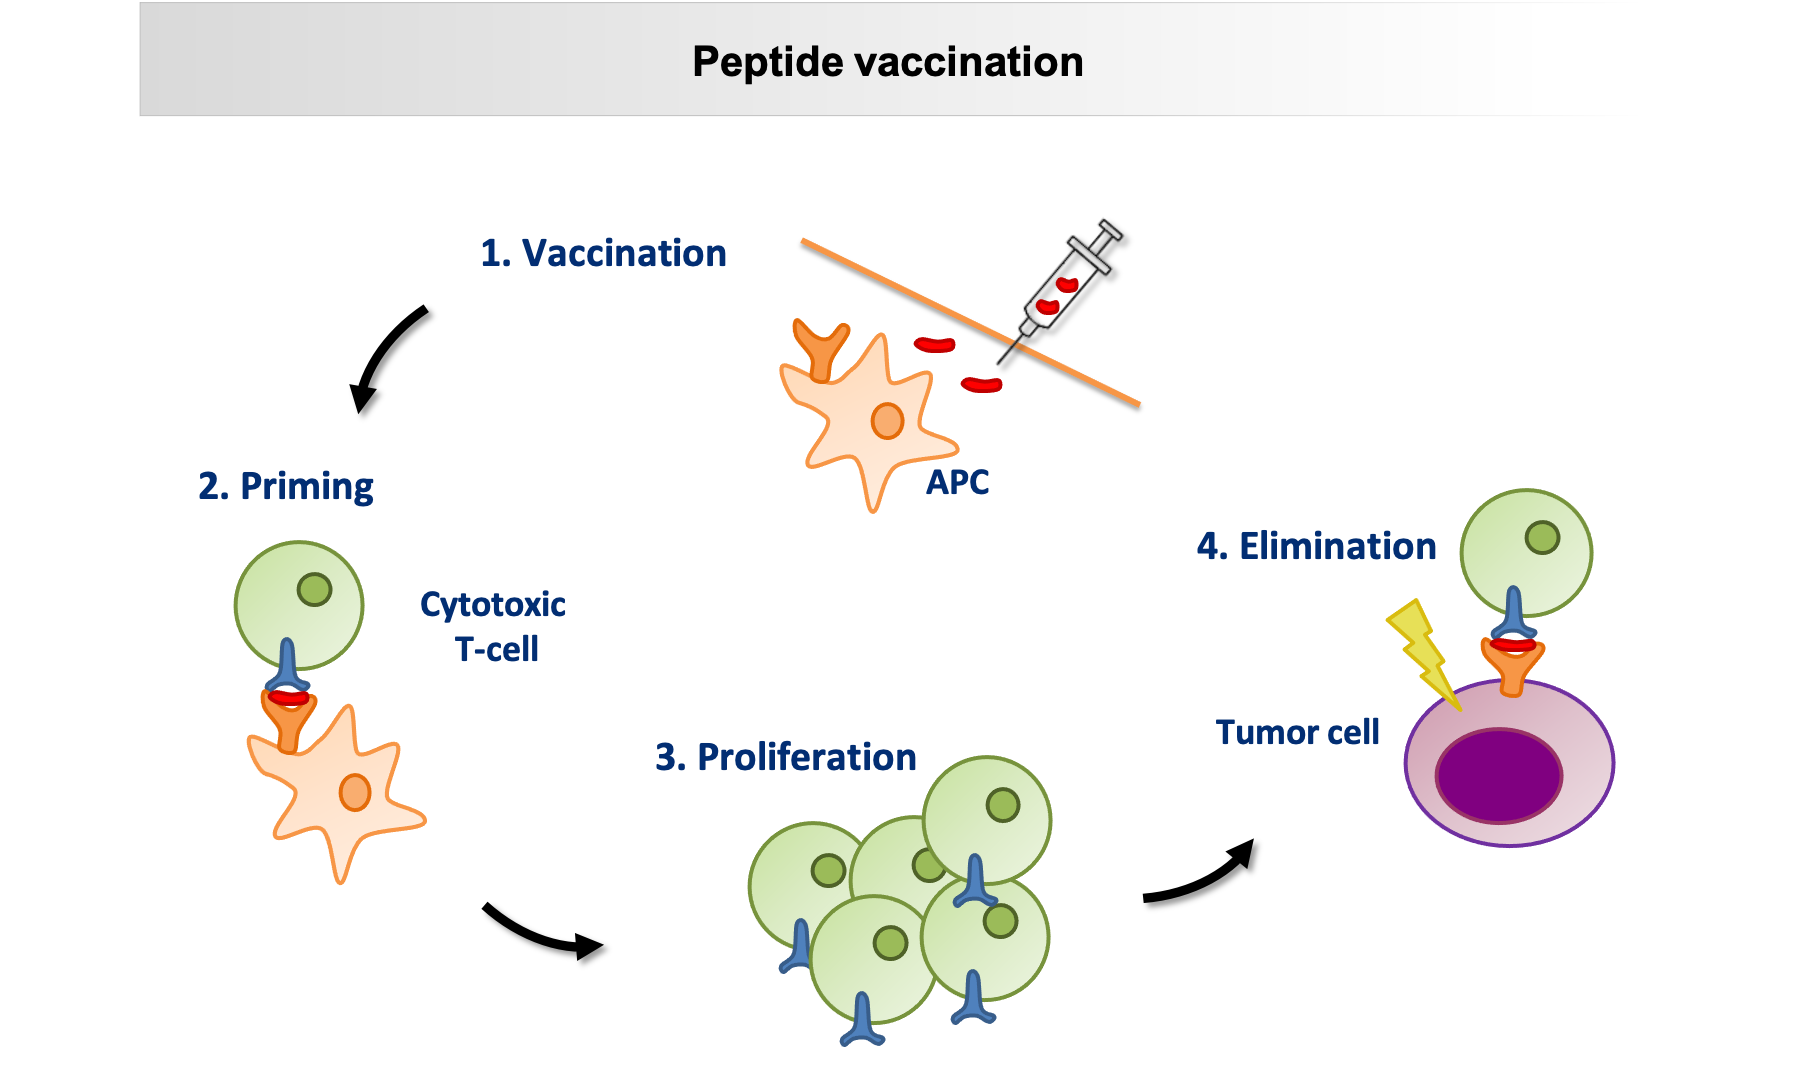 The schematic shows the peptide vaccination process based on the four essential steps. The steps are arranged counterclockwise and connected by arrows: after subcutaneous injection of the synthetic peptides (1.), the peptides are presented by antigen-presenting cells (APC) to the T cells (2.), peptide-specific T cells then proliferate (3.), the corresponding peptide is recognised on the tumour cell and  the tumour cell eliminated by the T cells (4.). 